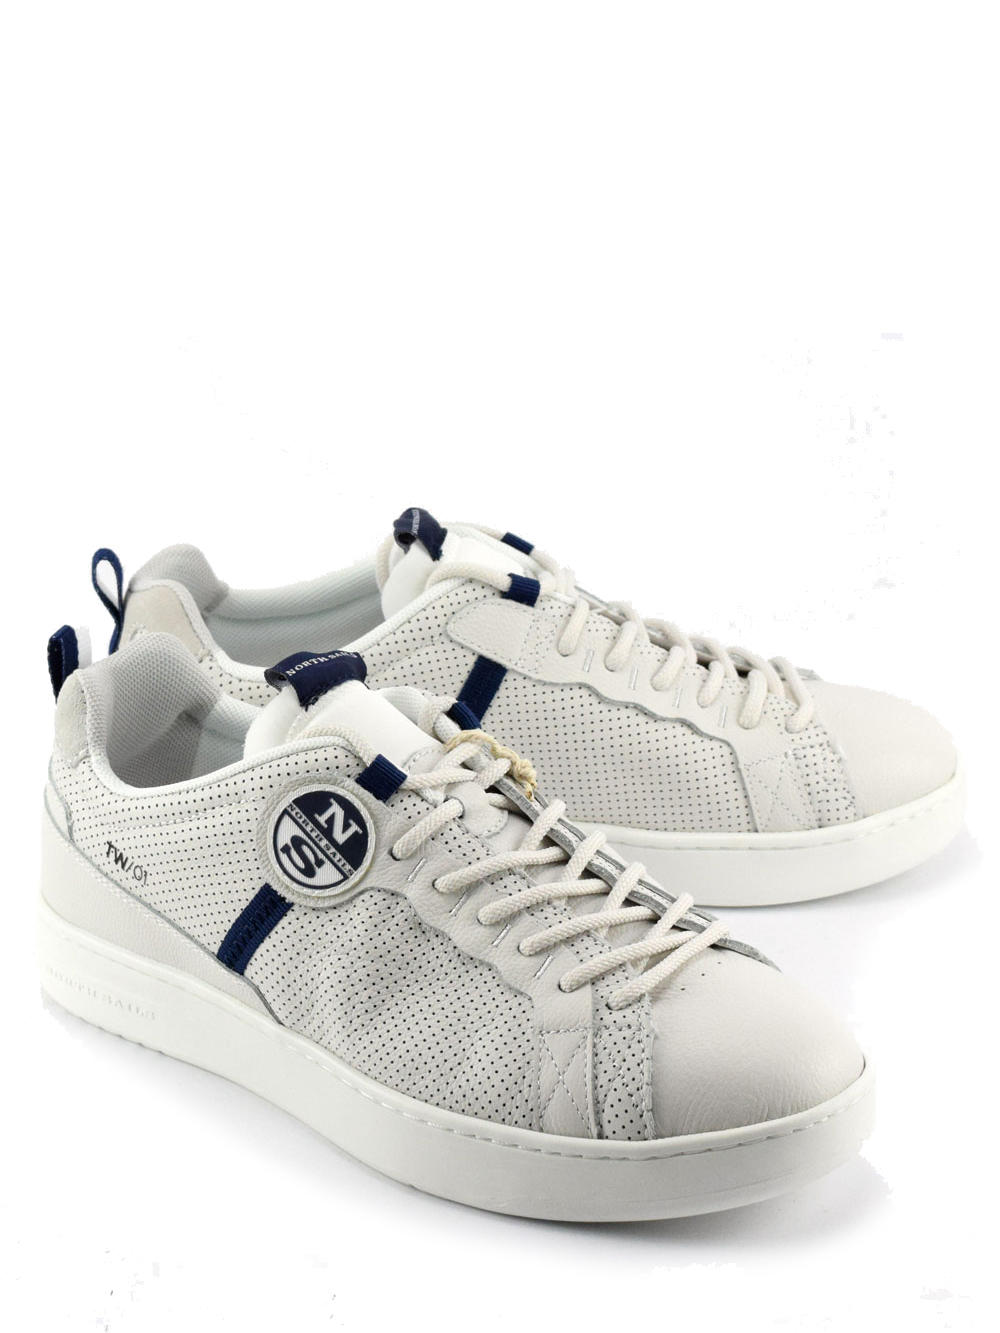 North Sails Premium Sneakers Whitetwp - Buy At Outlet Prices!